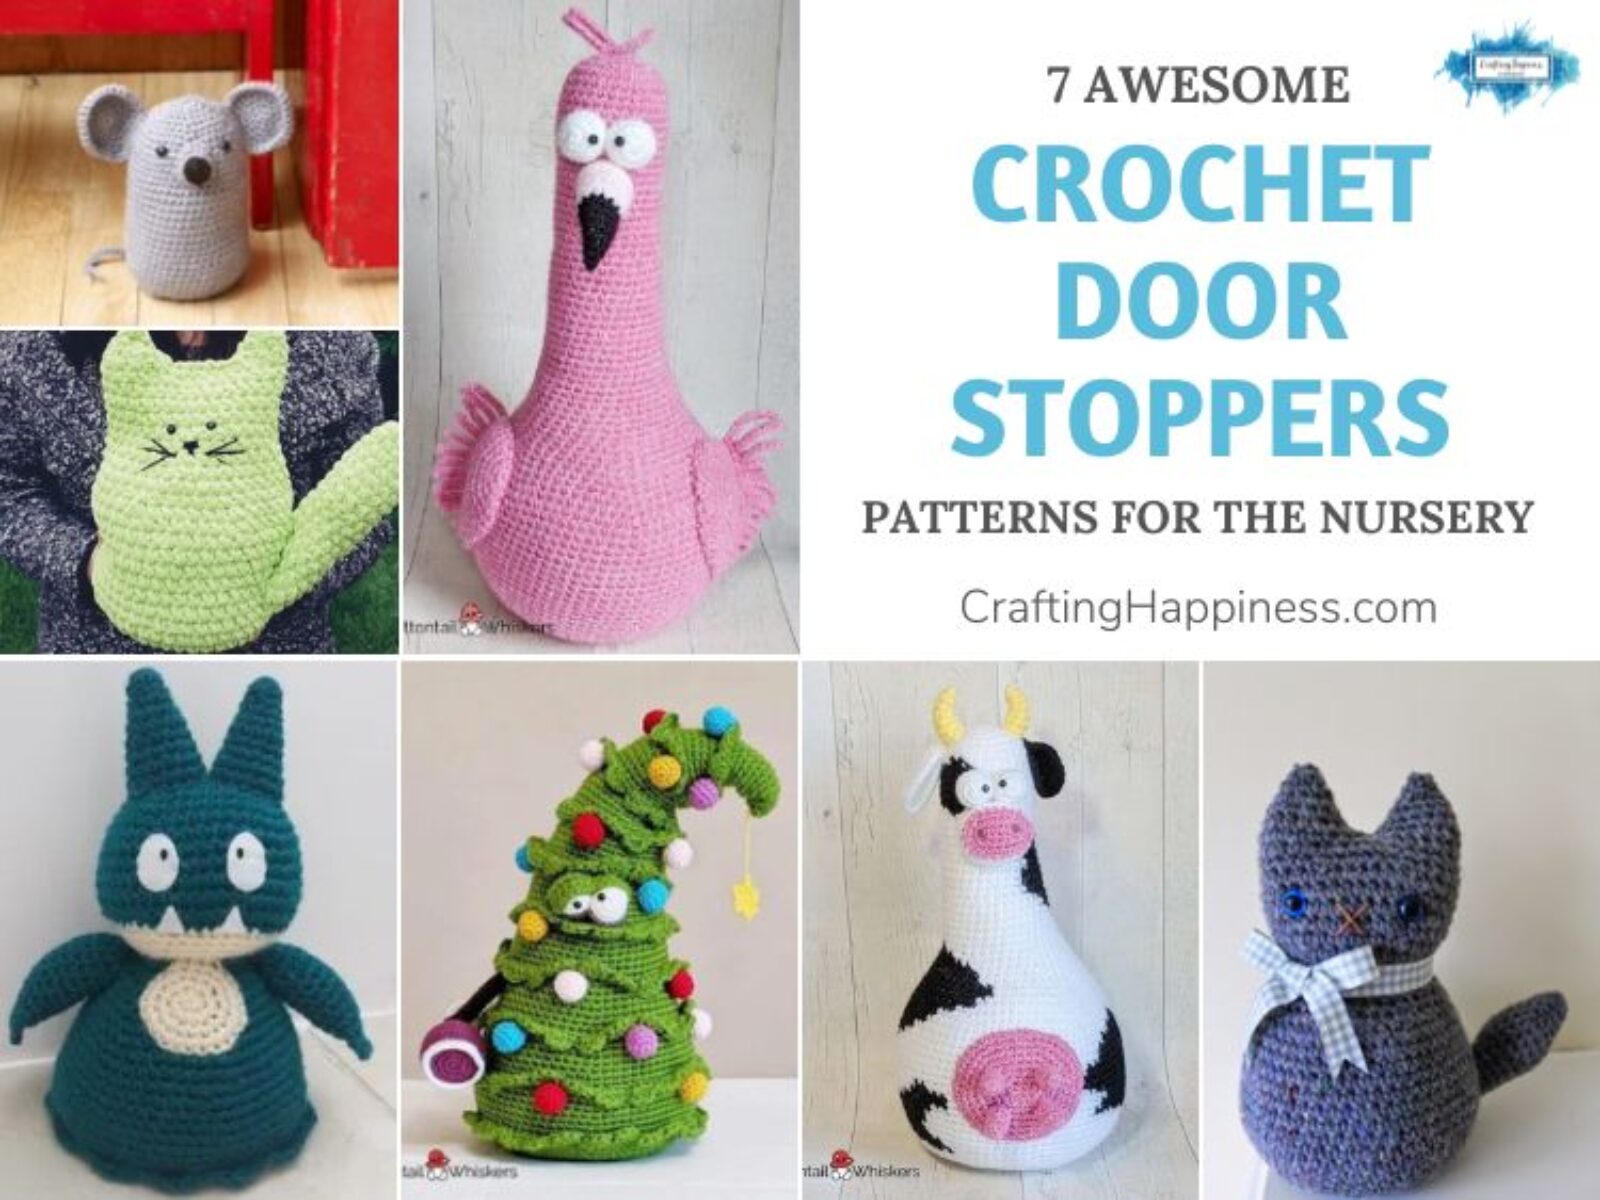 7 Awesome Crochet Door Stopper Patterns For The Nursery FB POSTER